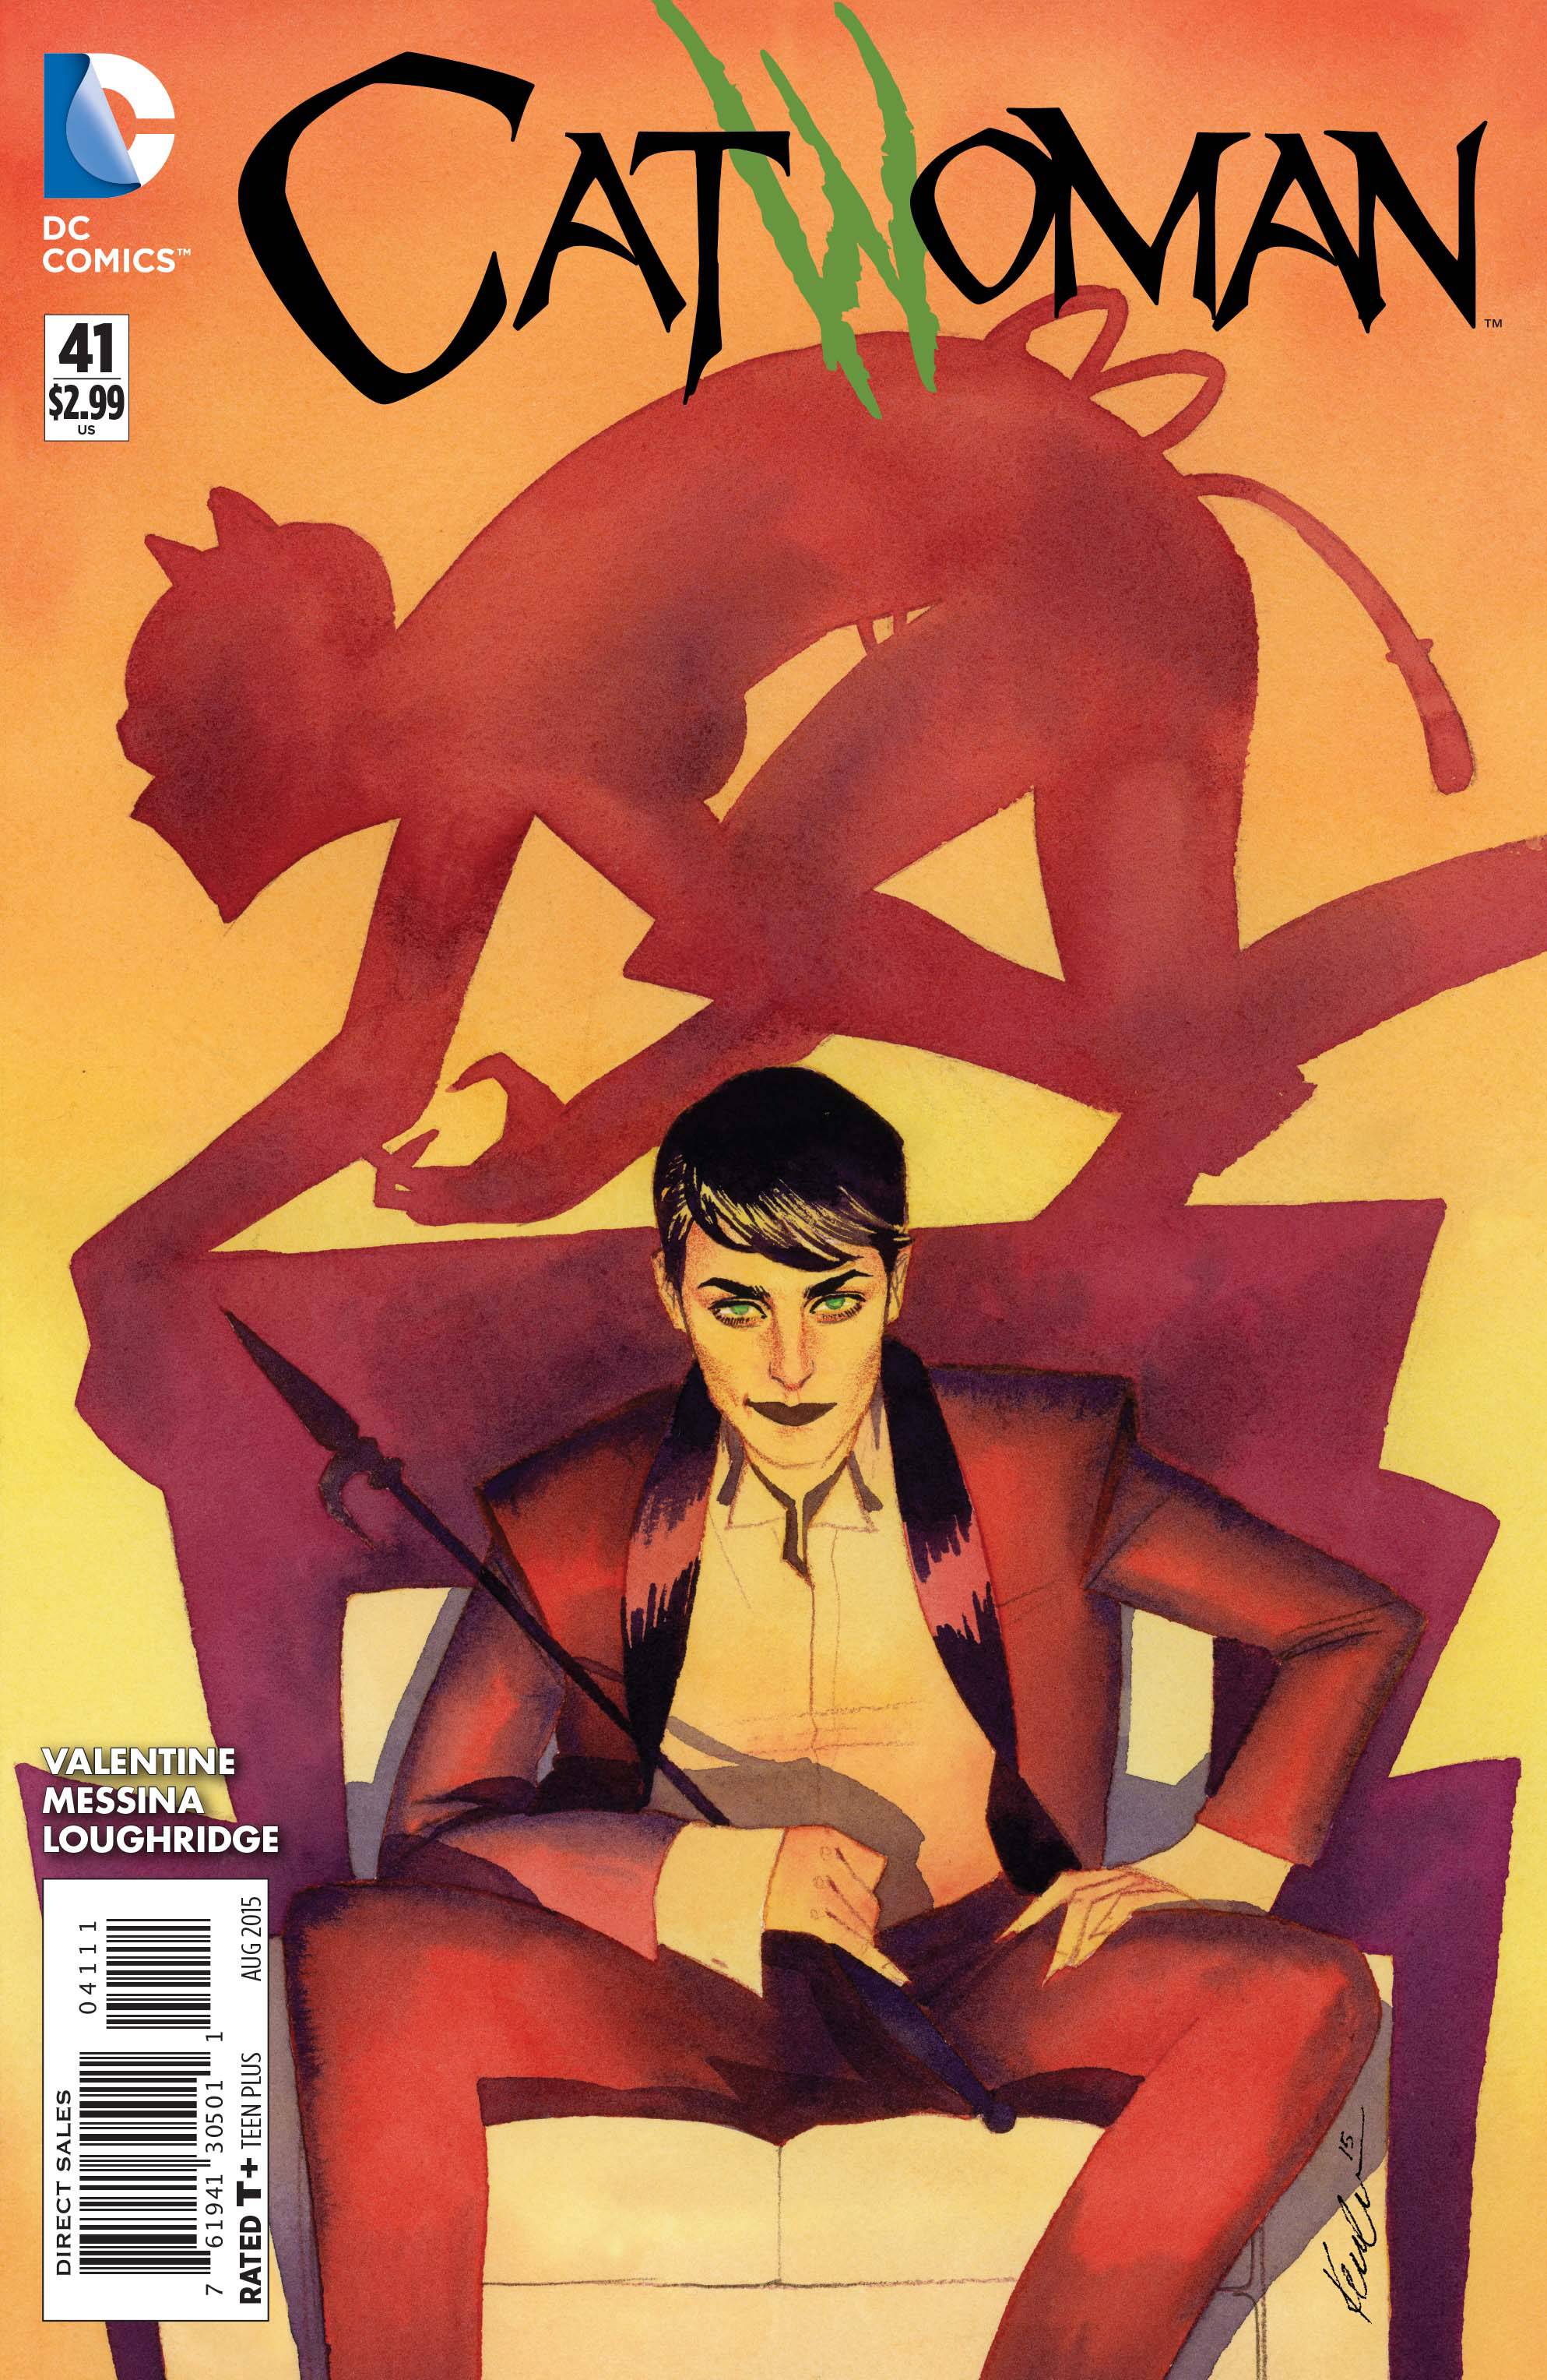 Catwoman #41 (2011)